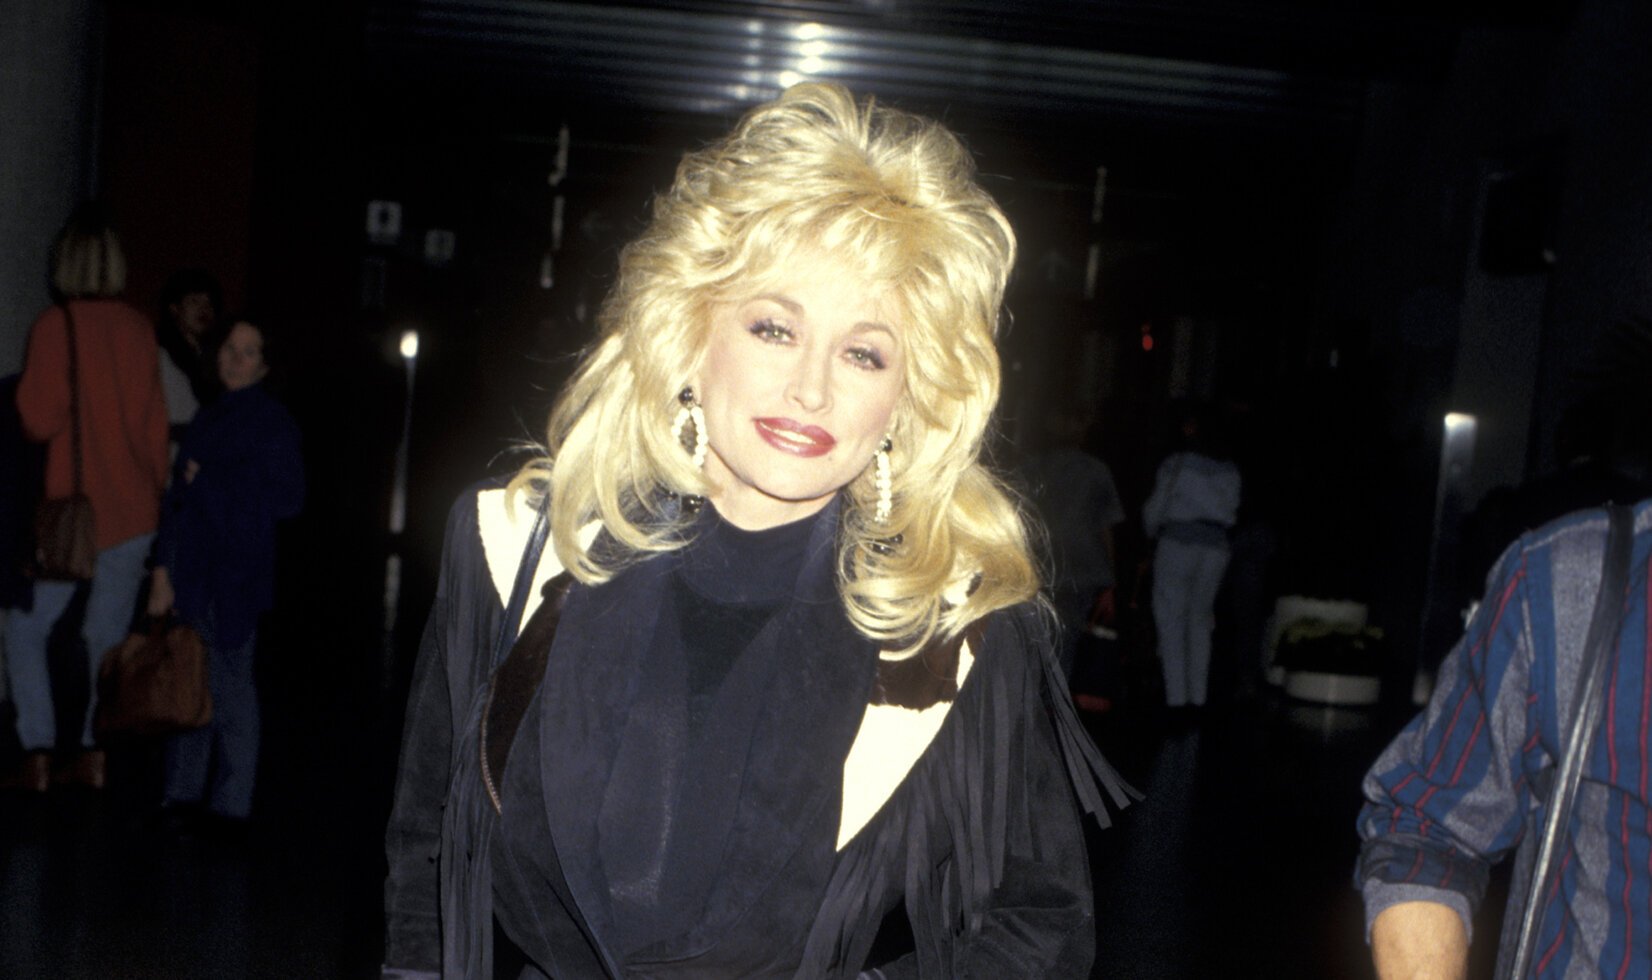 Dolly Parton at Los Angeles International Airport in 1993. She's in a black jacket and black top.